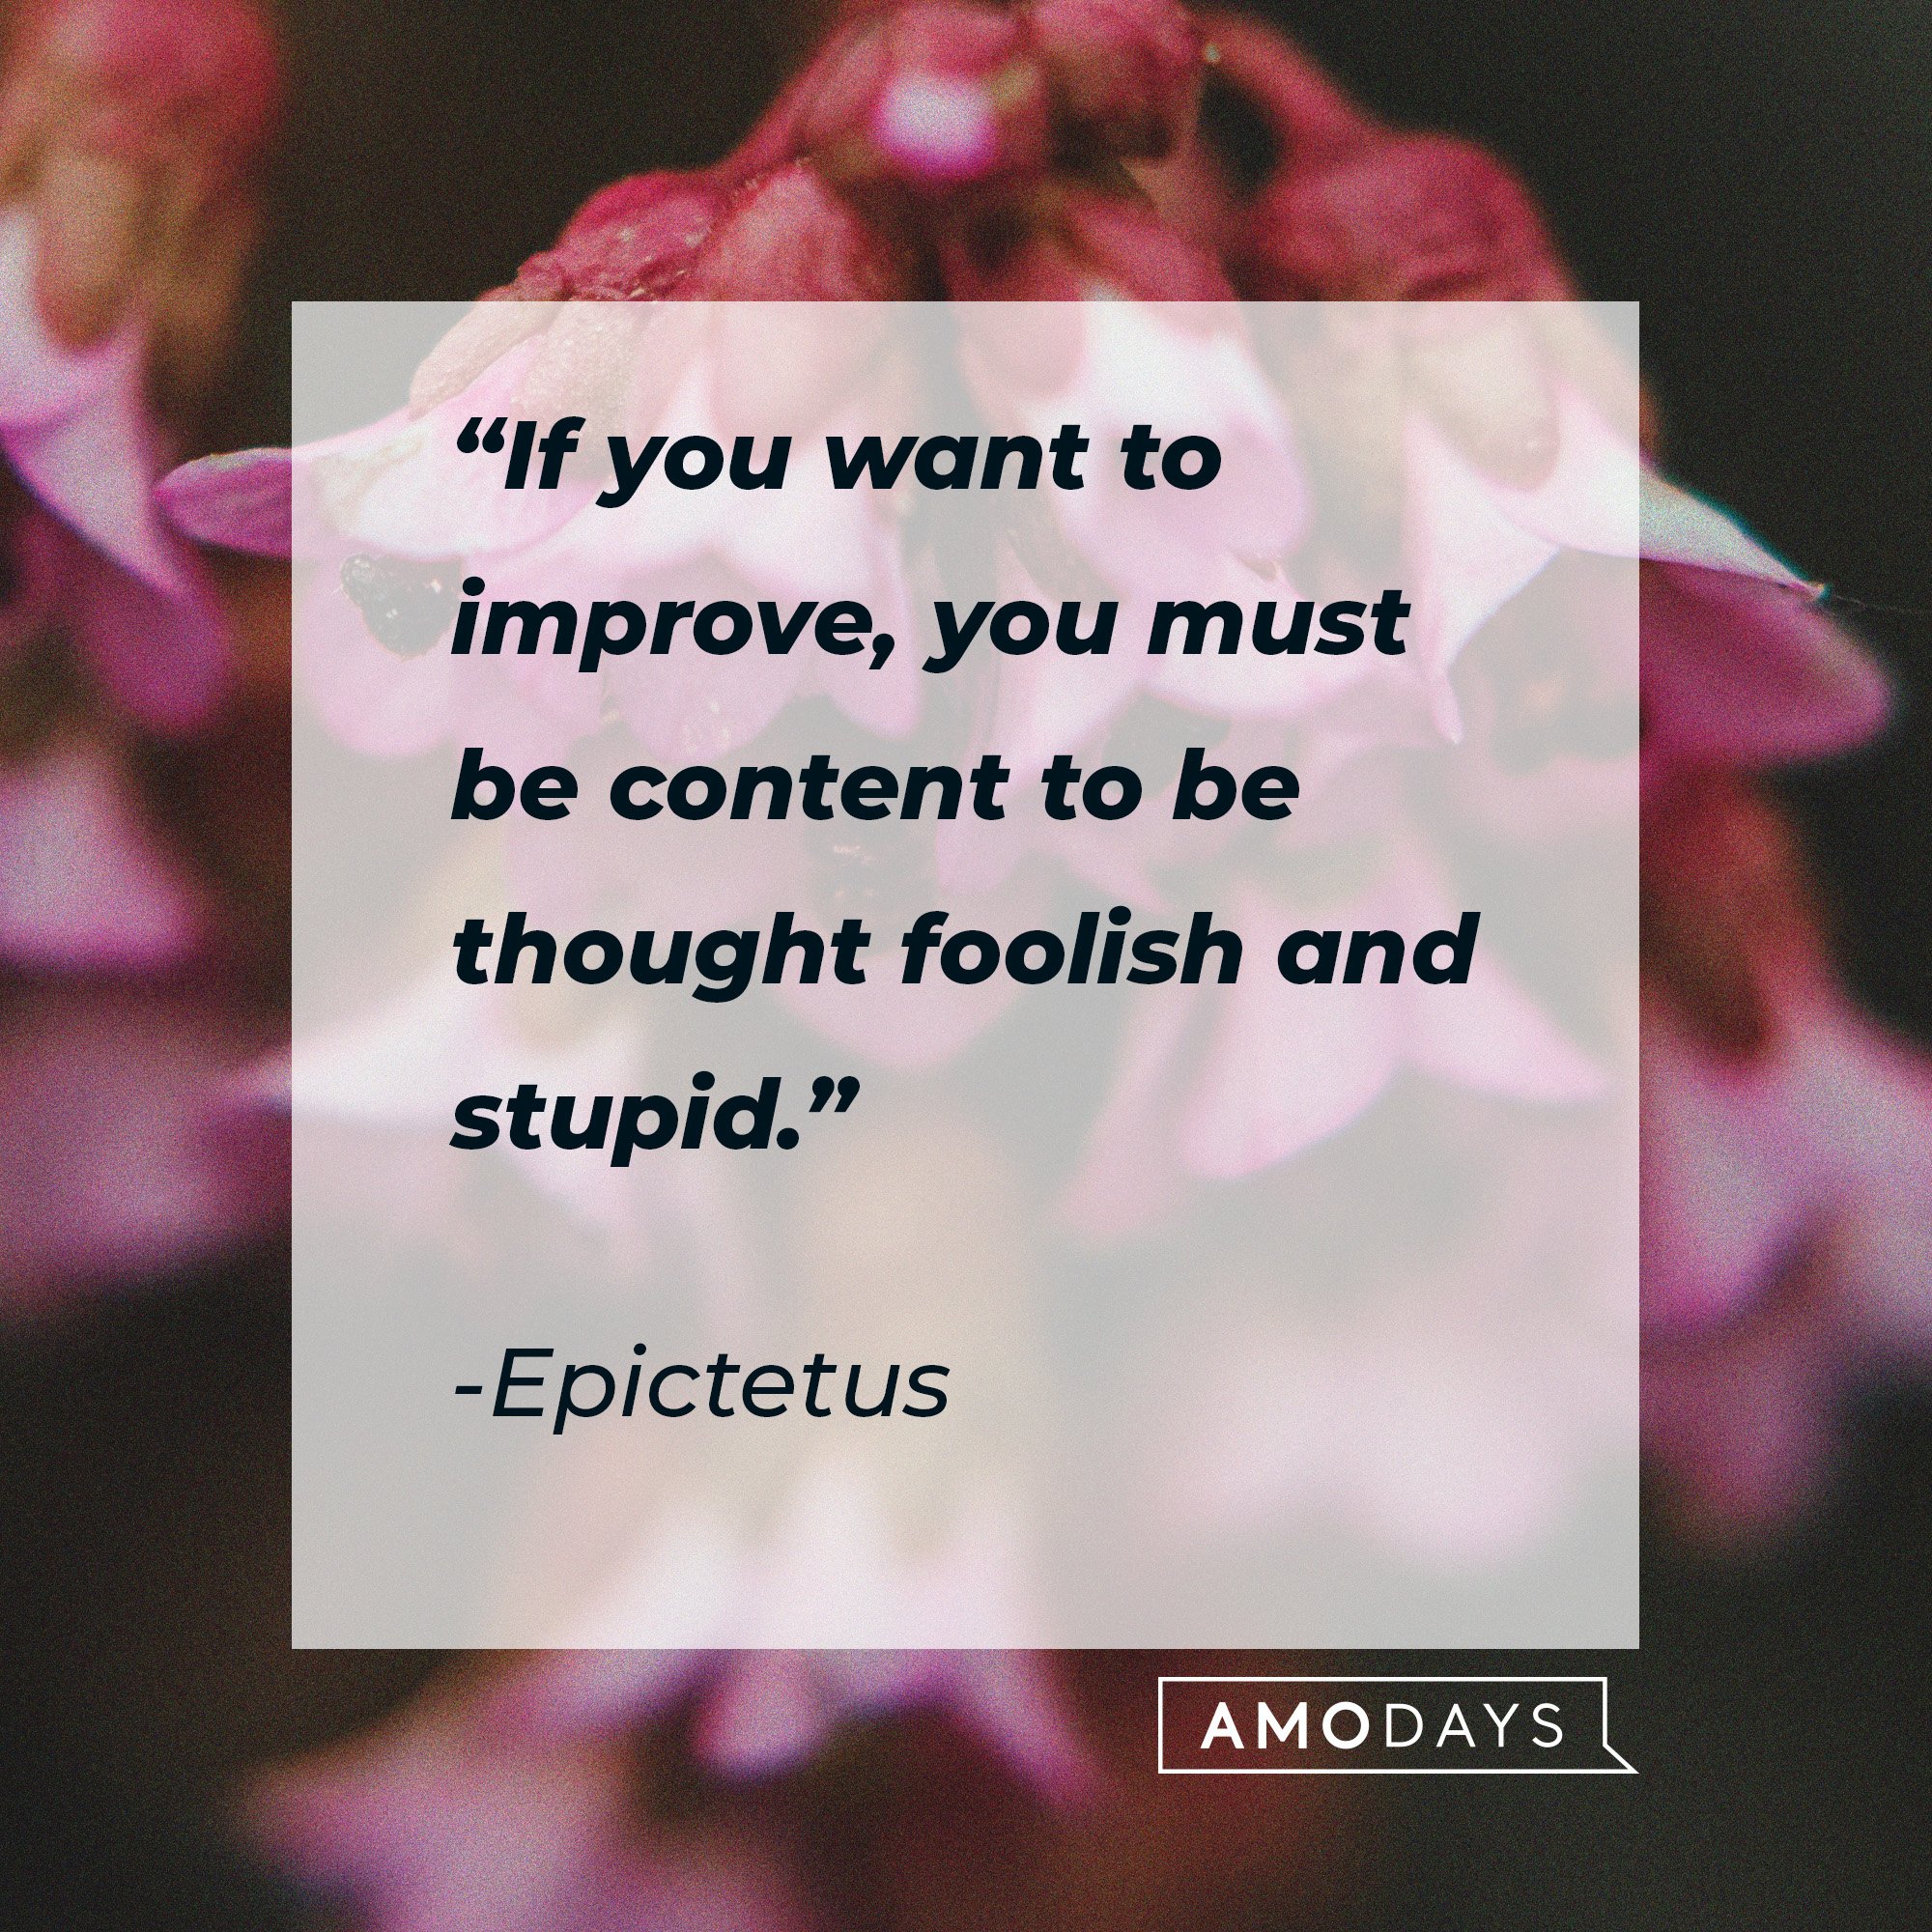  Epictetus's quote: “If you want to improve, you must be content to be thought foolish and stupid.” | Image: AmoDays